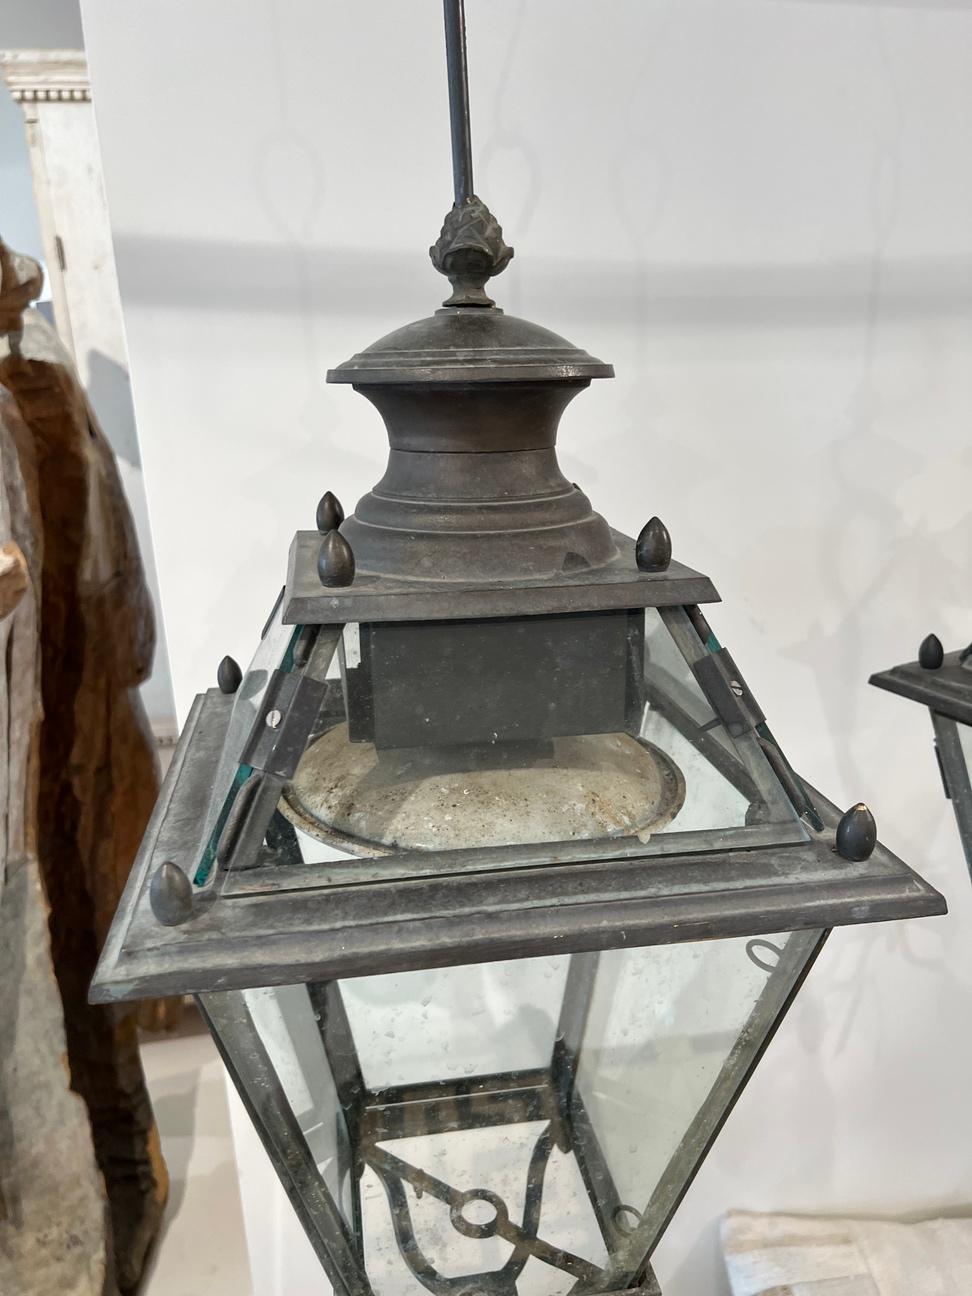 These lanterns were created in Genoa, which has a famous landmark, Lanterna di Genova (Lighthouse of Genoa); many consider this lighthouse to be a symbol of the city. These lanterns would look regal in front of your home. 
Must be rewired for US